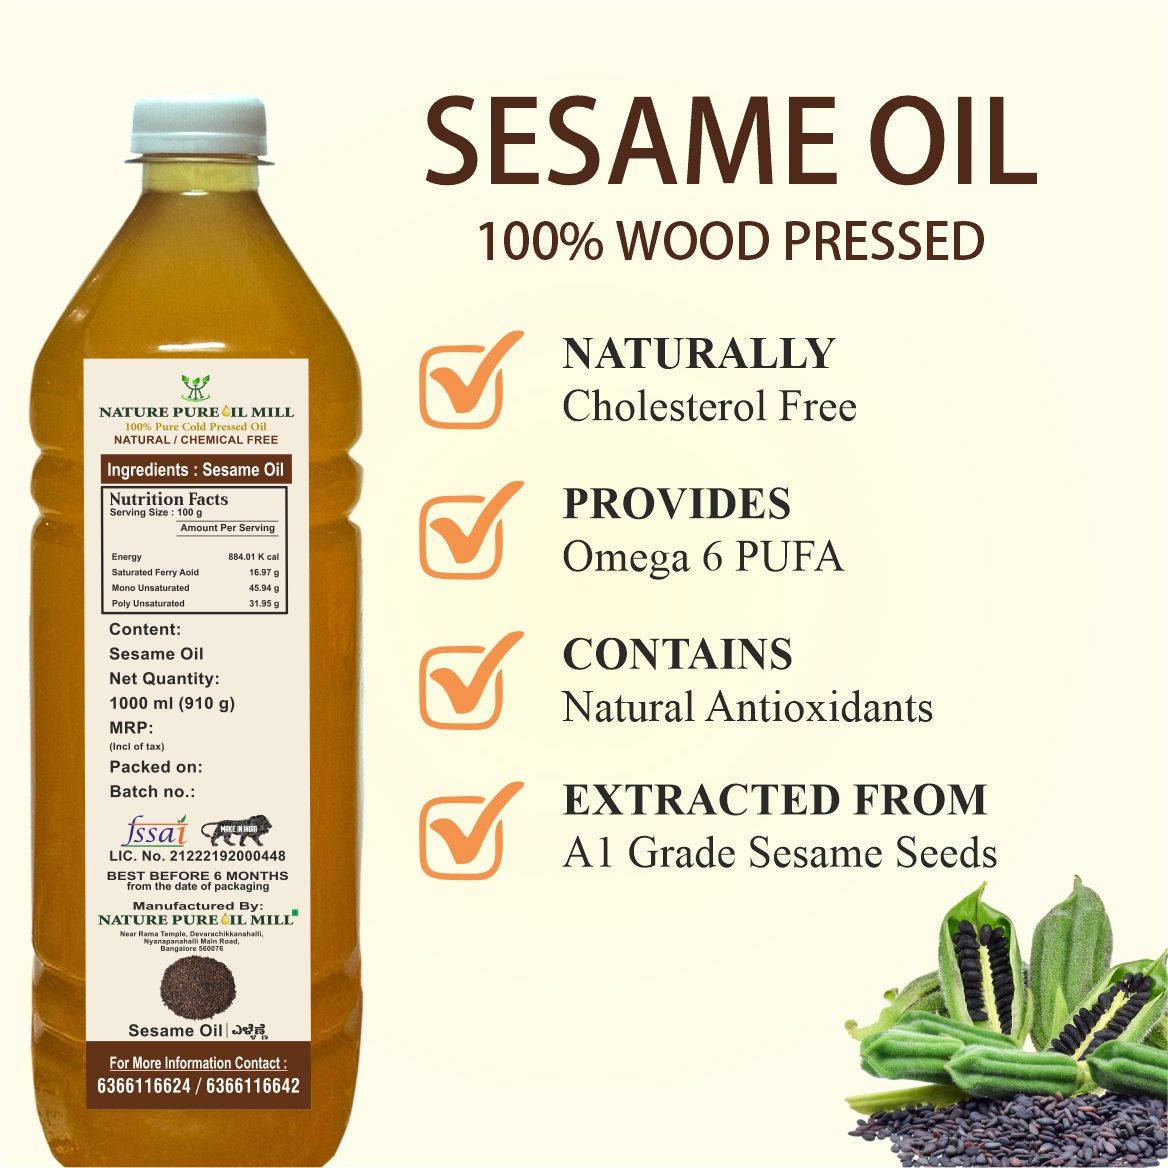 Sesame Oil 100% Pure And Unrefined Wood Pressed - Nature Pure Oil Mill